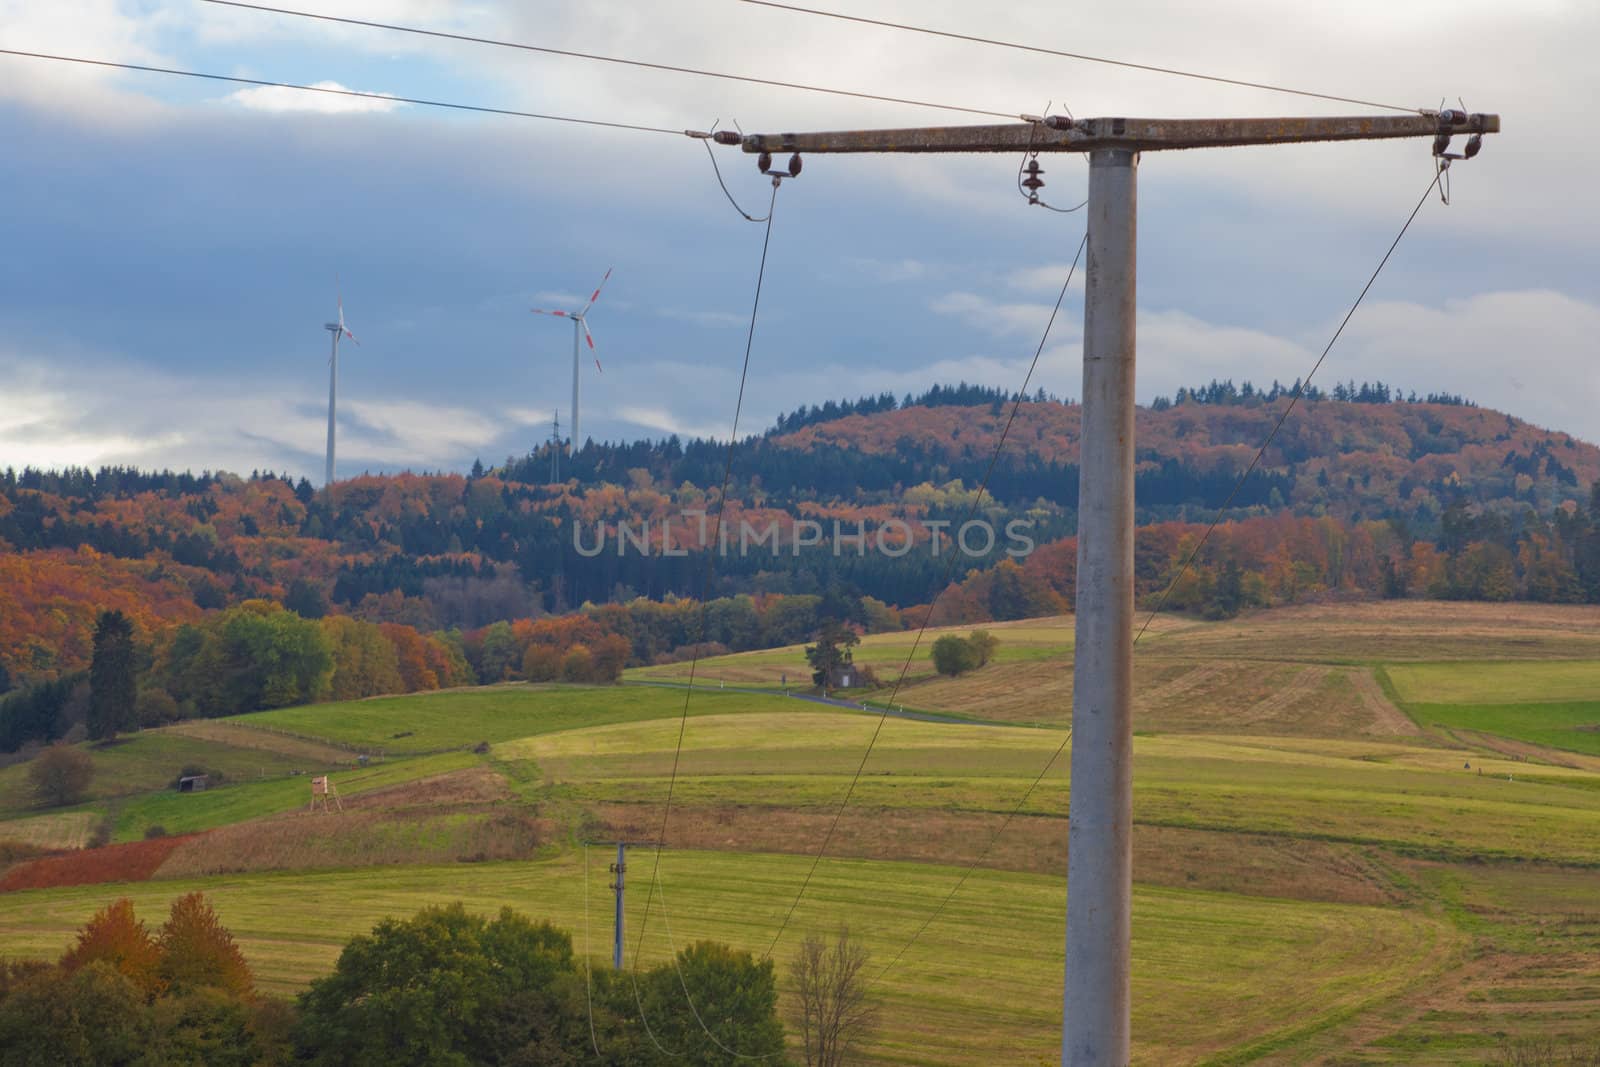 Power line and wind turbines by PiLens